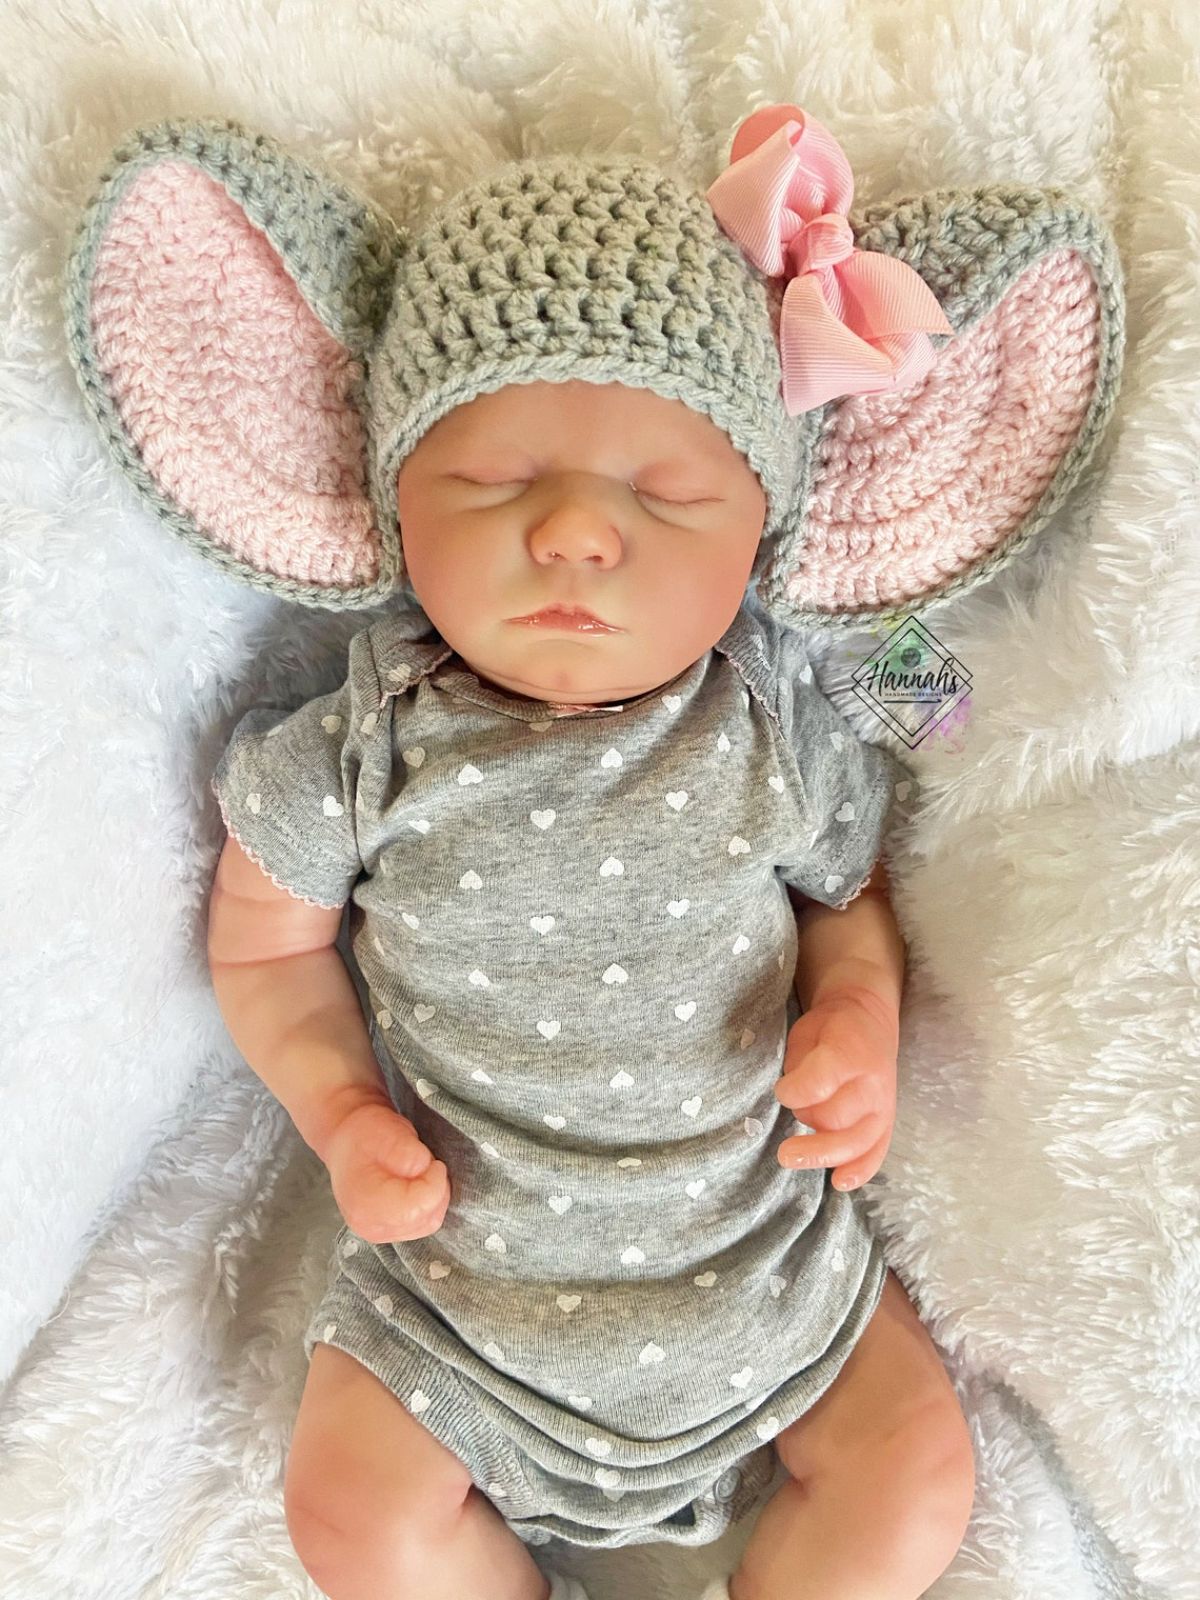 Newborn baby asleep wearing a gray crochet beanie with large gray and pink elephant ears on either side and a pink bow on the right ear.